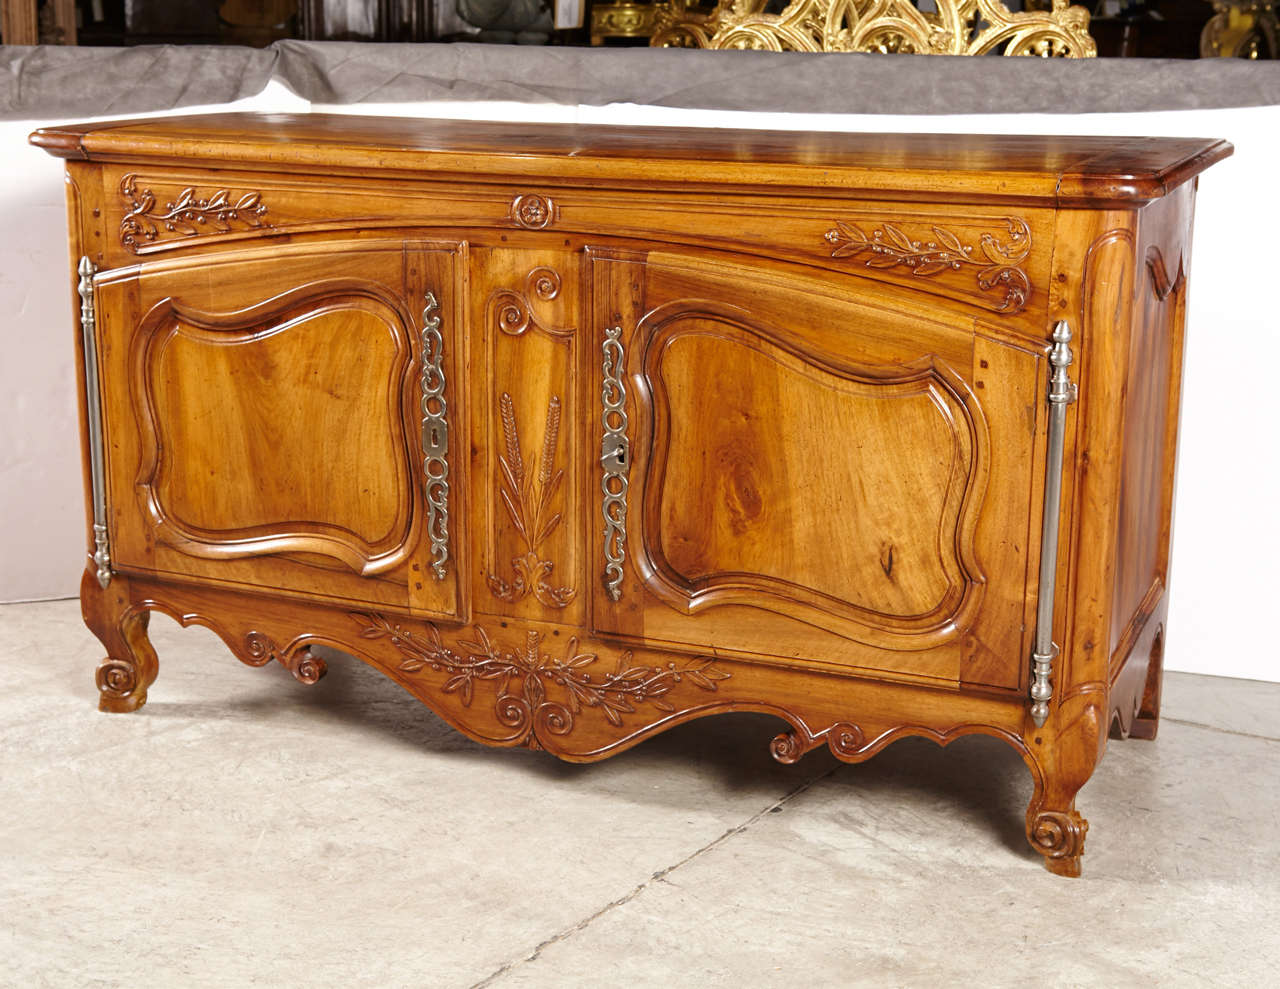 This rare large buffet from Arles is from the early 1700s. It has been hand carved and pegged throughout. The impressive large door hinges and hardware are original to the piece, and it has been made from French Blond Walnut Wood.The piece has